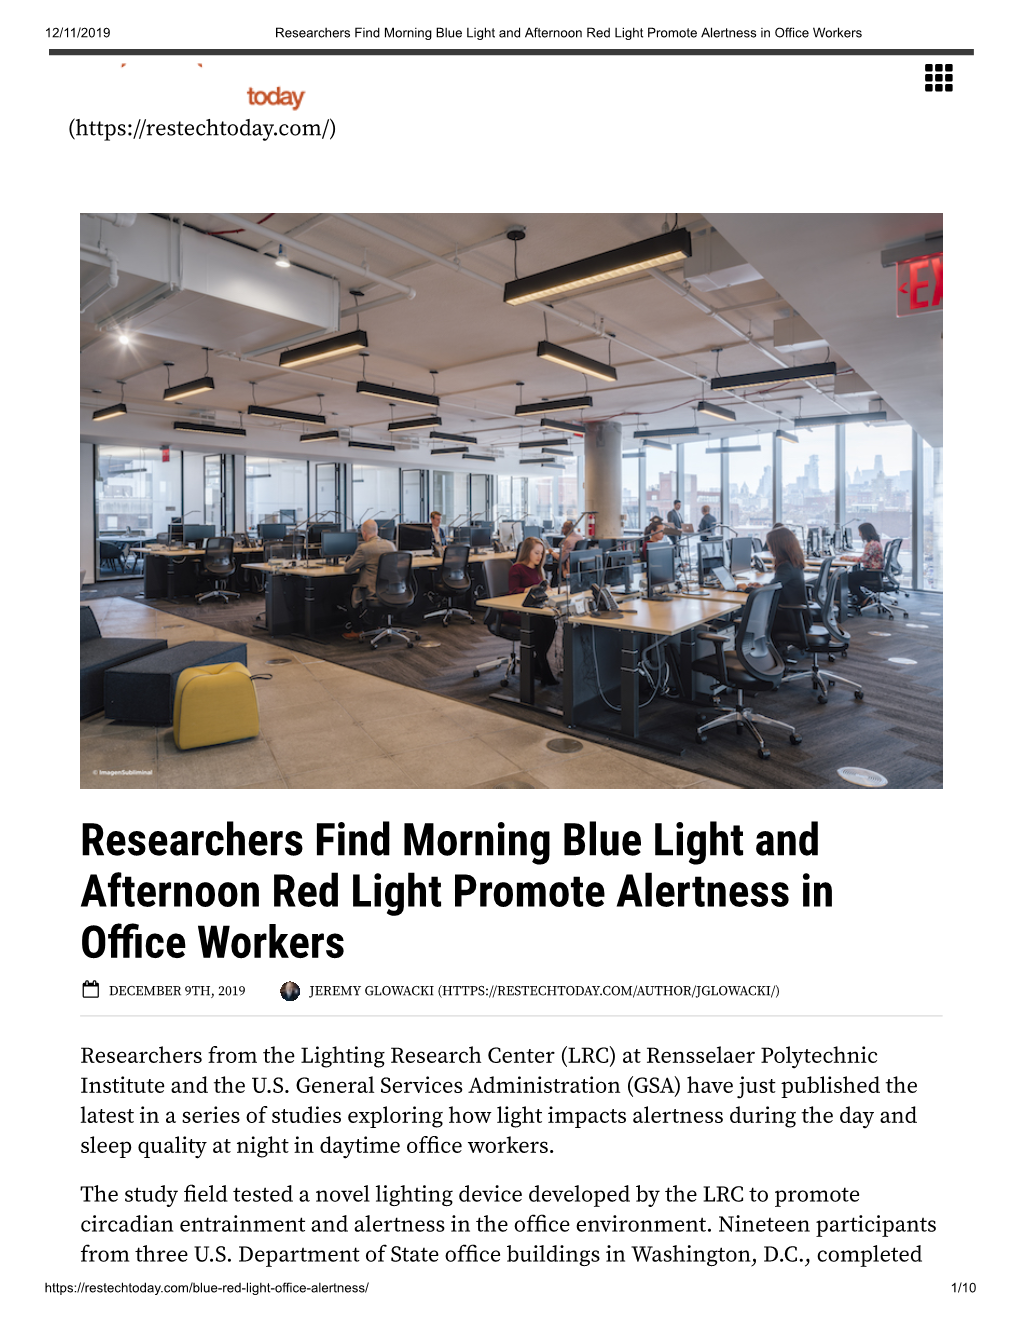 Researchers Find Morning Blue Light and Afternoon Red Light Promote Alertness in Office Workers 